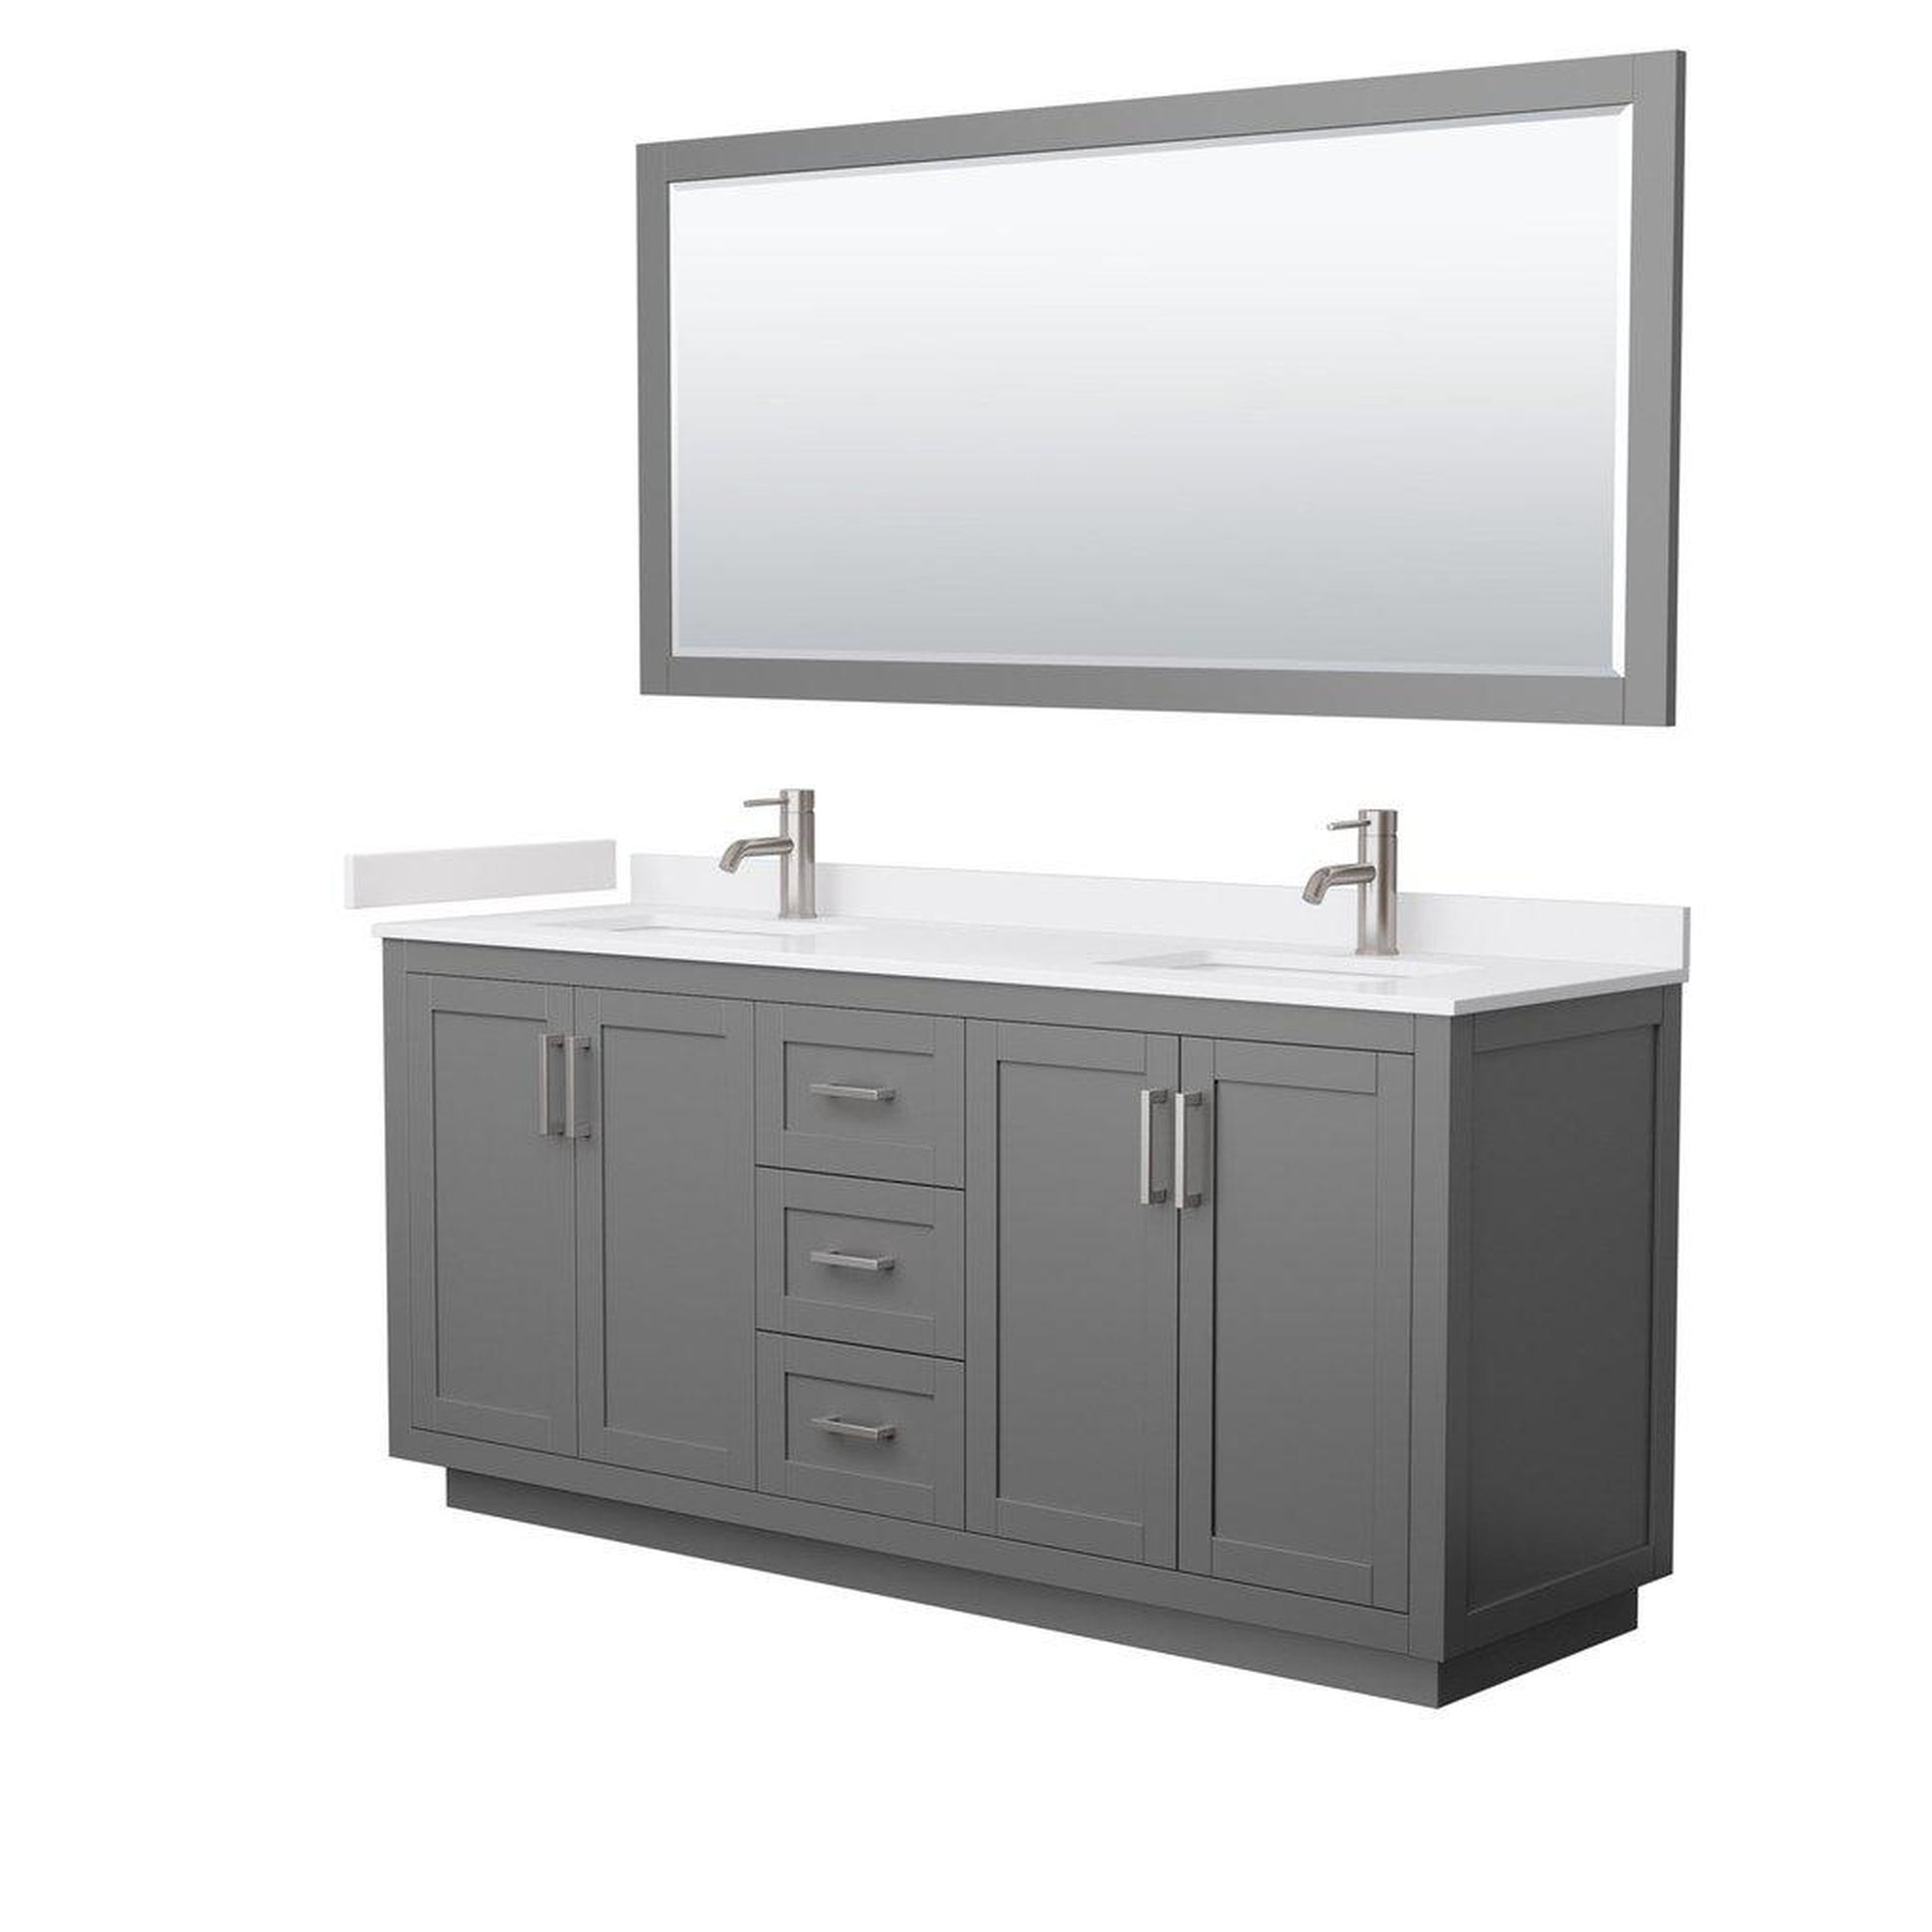 Wyndham Collection Miranda 72" Double Bathroom Dark Gray Vanity Set With White Cultured Marble Countertop, Undermount Square Sink, 70" Mirror And Brushed Nickel Trim